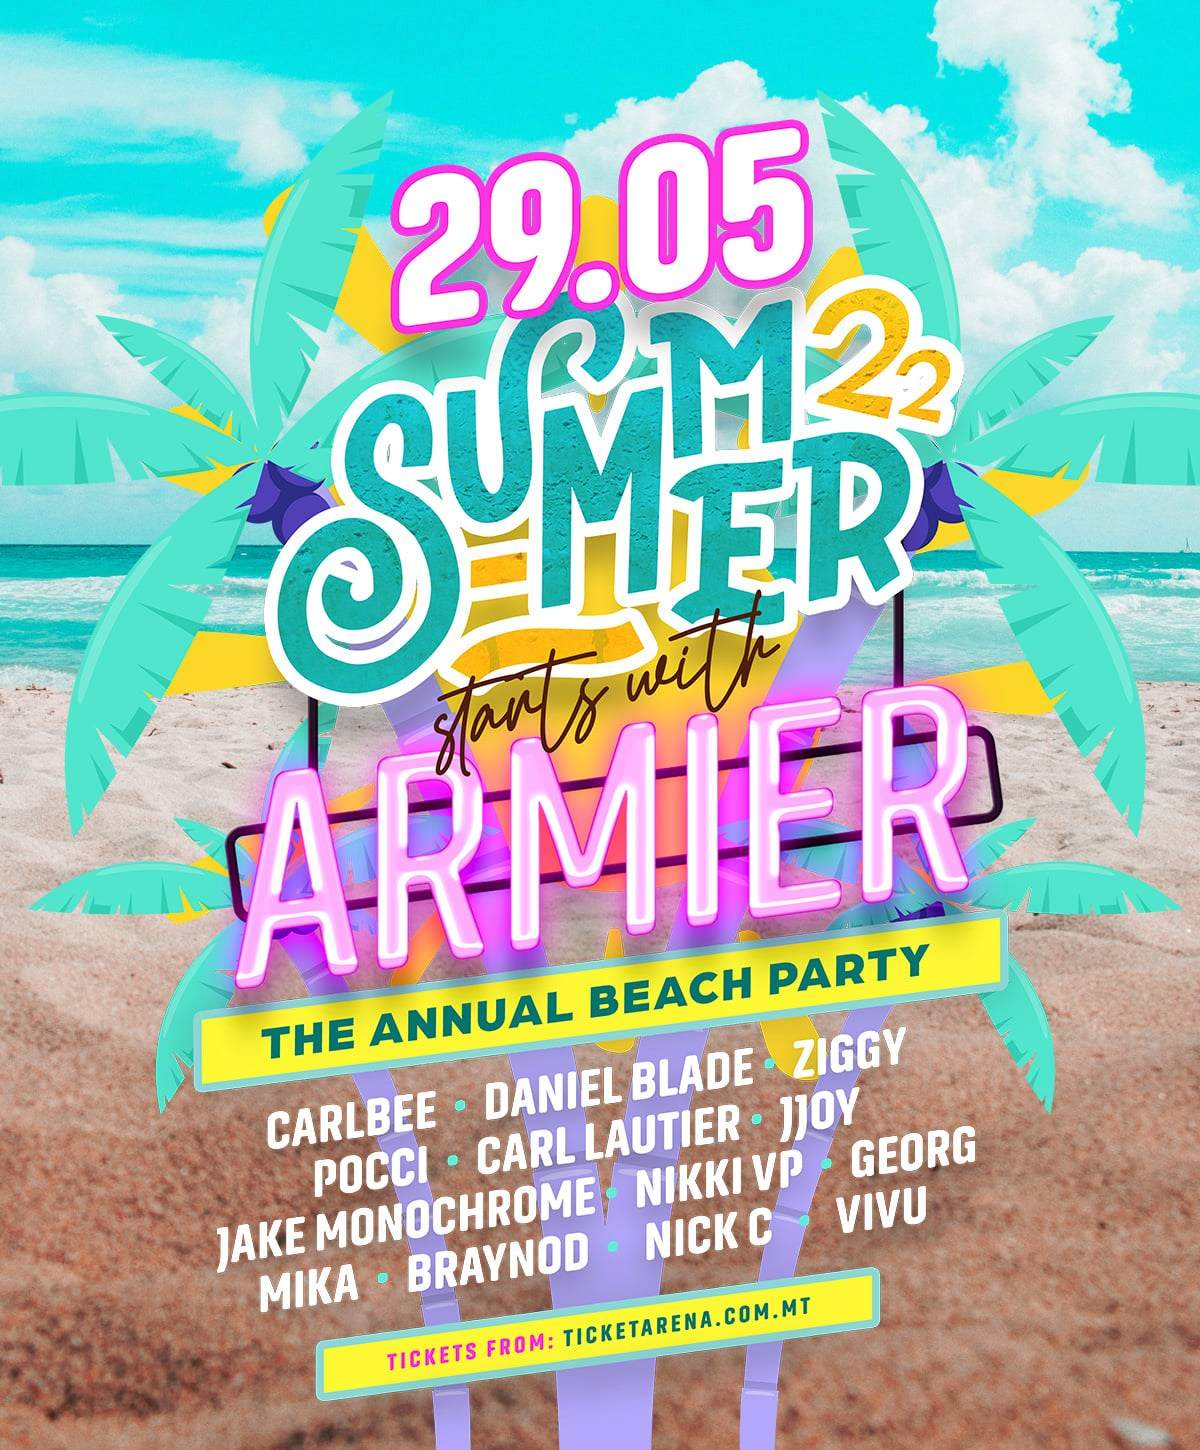 The Annual Armier Beach Party - フライヤー表